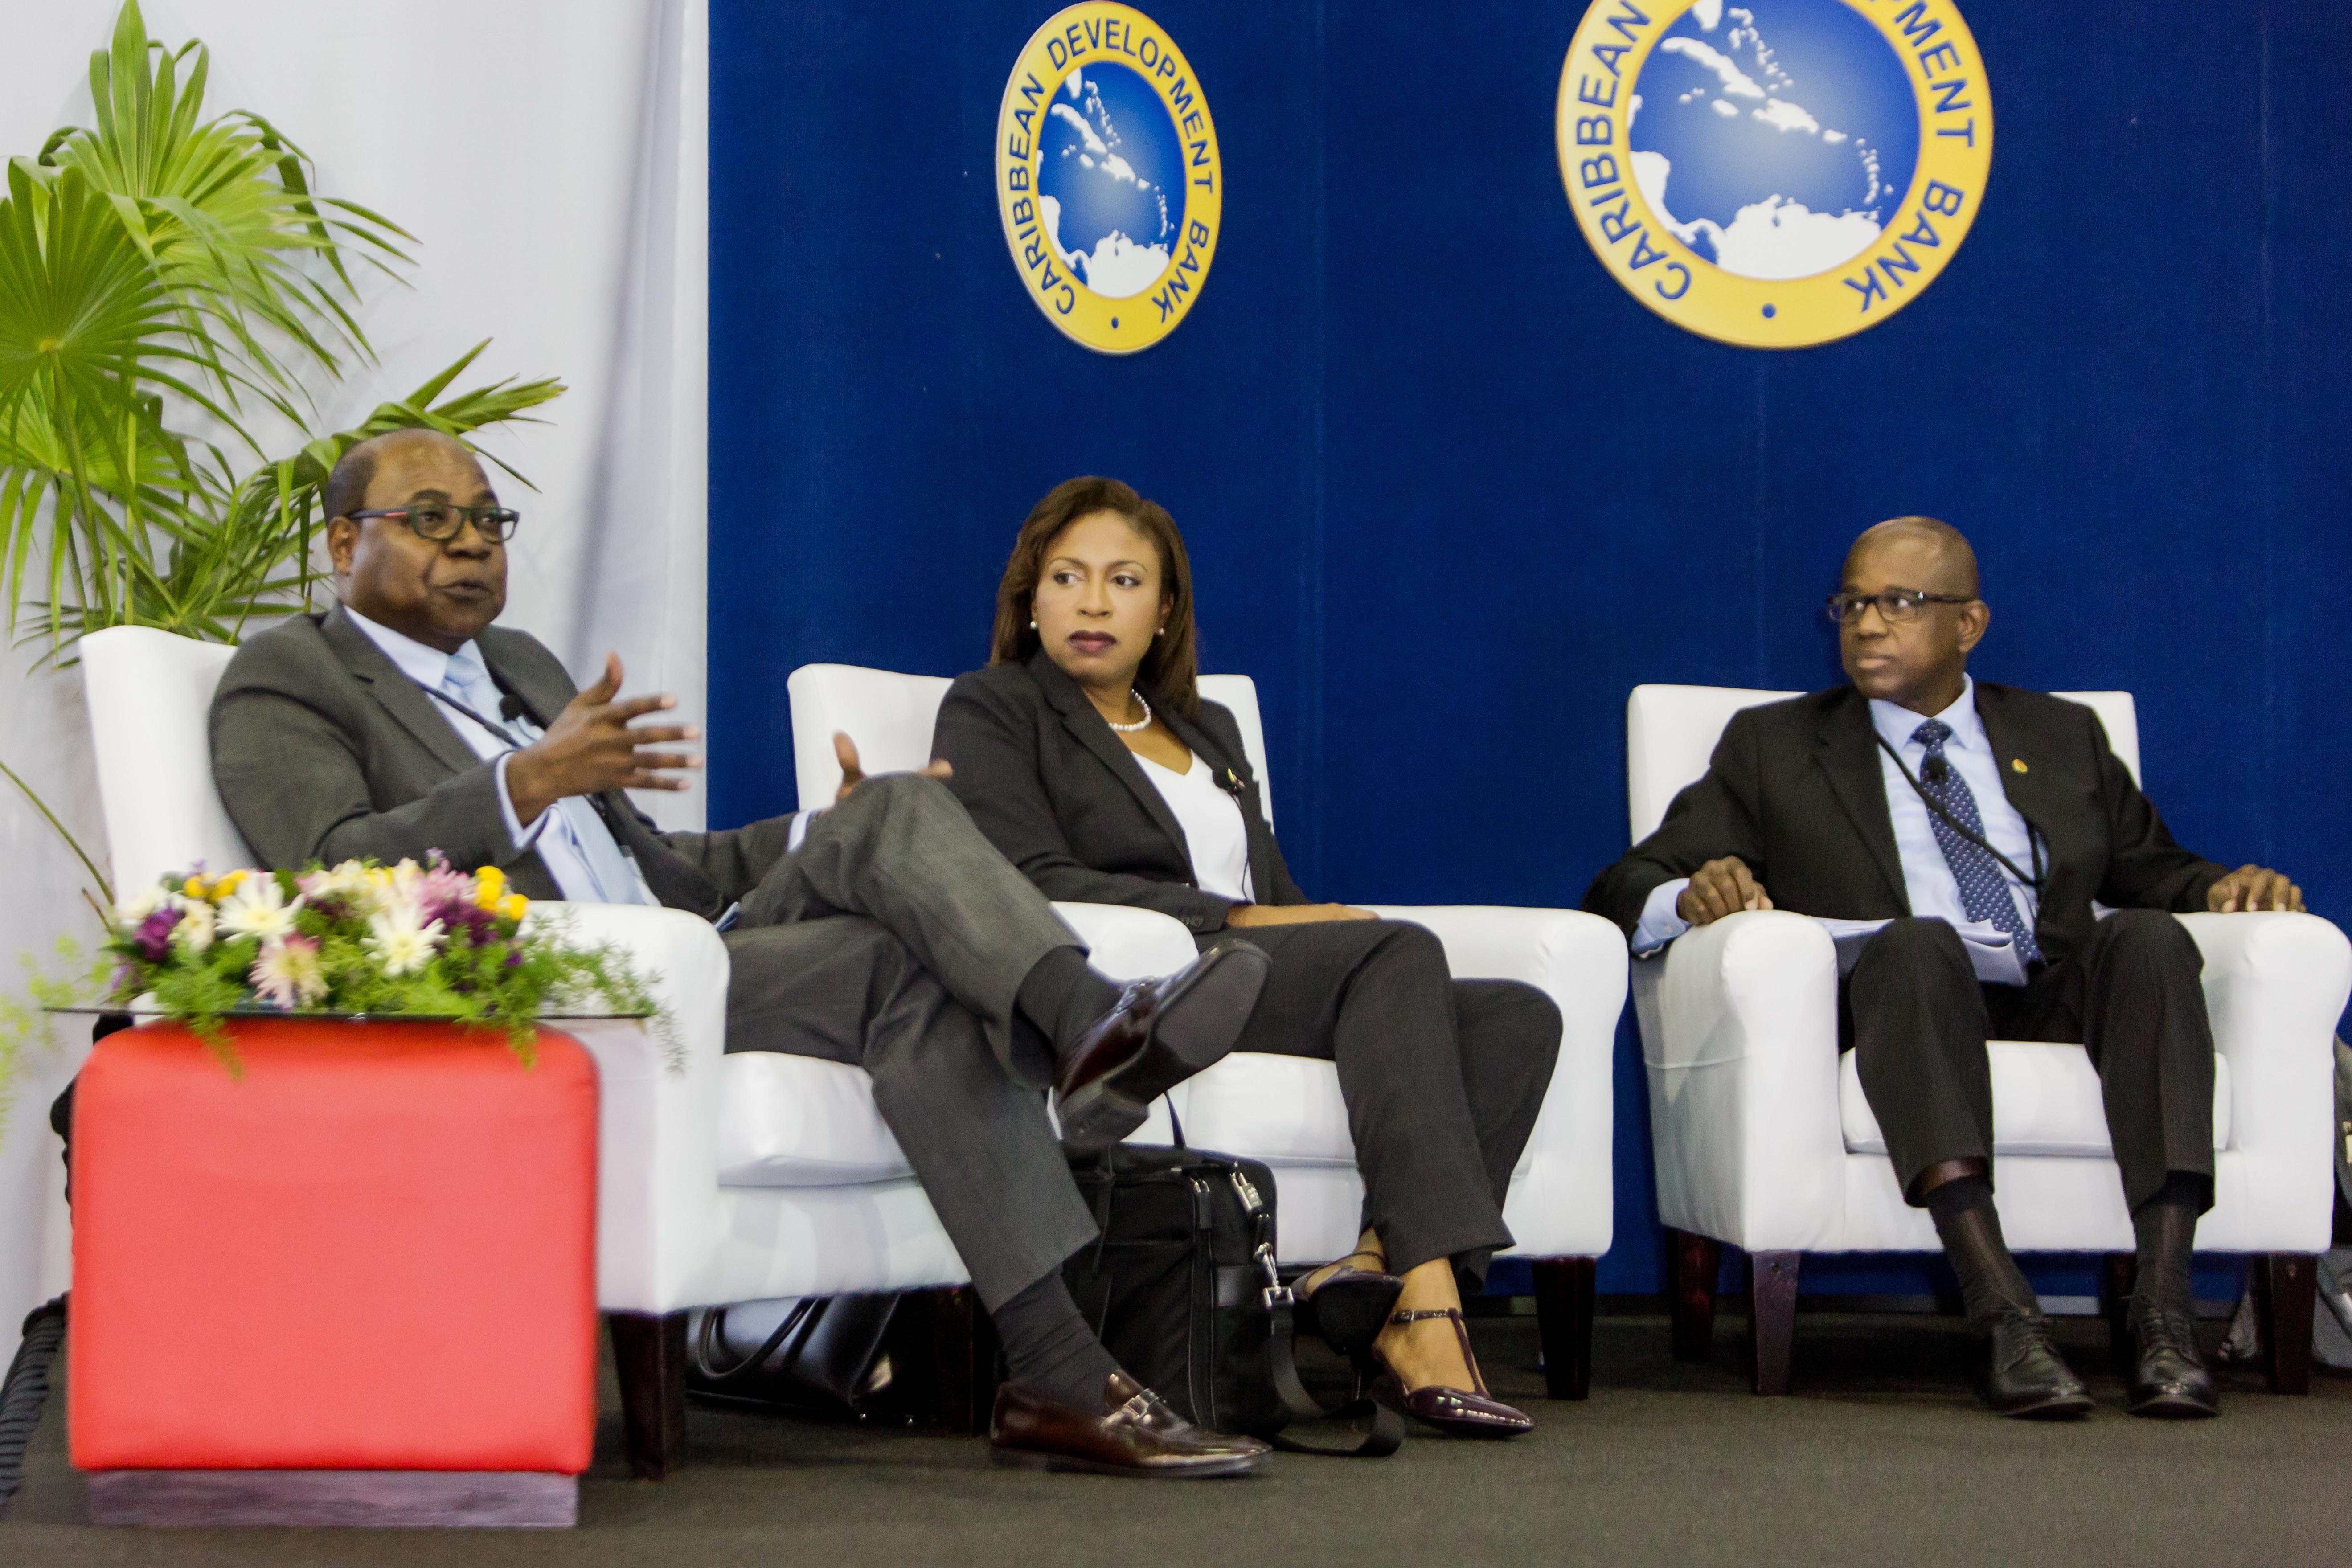 (L-R) Honourable Edmund Bartlett, Minister of Tourism, Government of Jamaica makes a point during the seminar, while Stacy Cox, Executive Director, Turks and Caicos Hotel and Tourism Association and Hugh Riley, Secretary General and Chief Executive Officer, Caribbean Tourism Organisation look on.